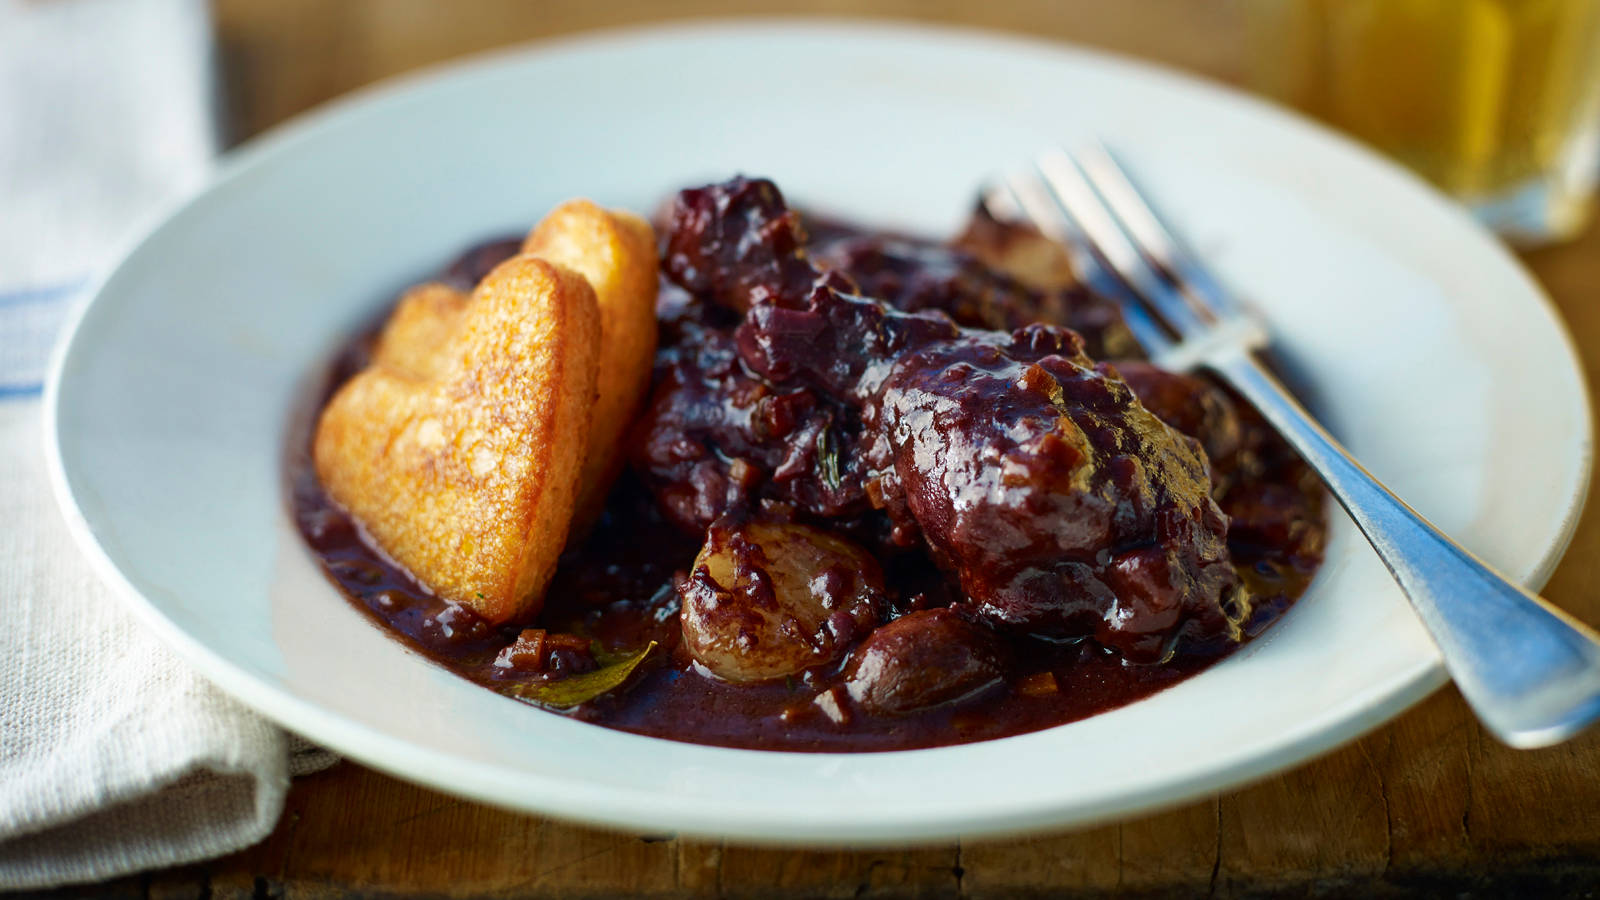 Caption: Authentic Coq Au Vin Platter- A Feast for the Eyes and Palate Wallpaper